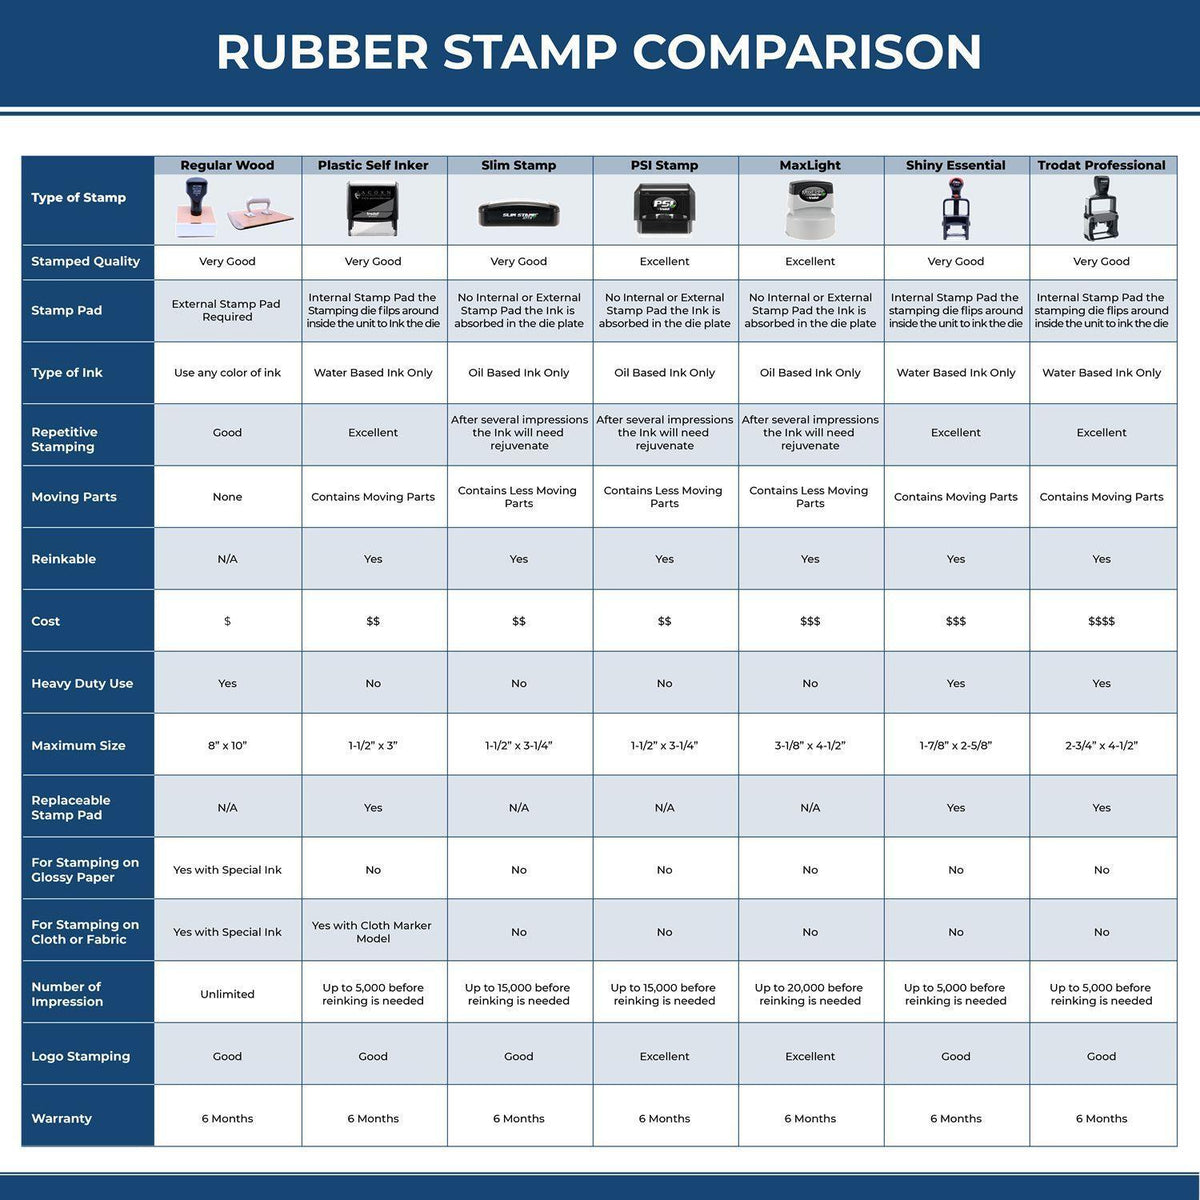 Large Admitted Rubber Stamp 4990R Rubber Stamp Comparison